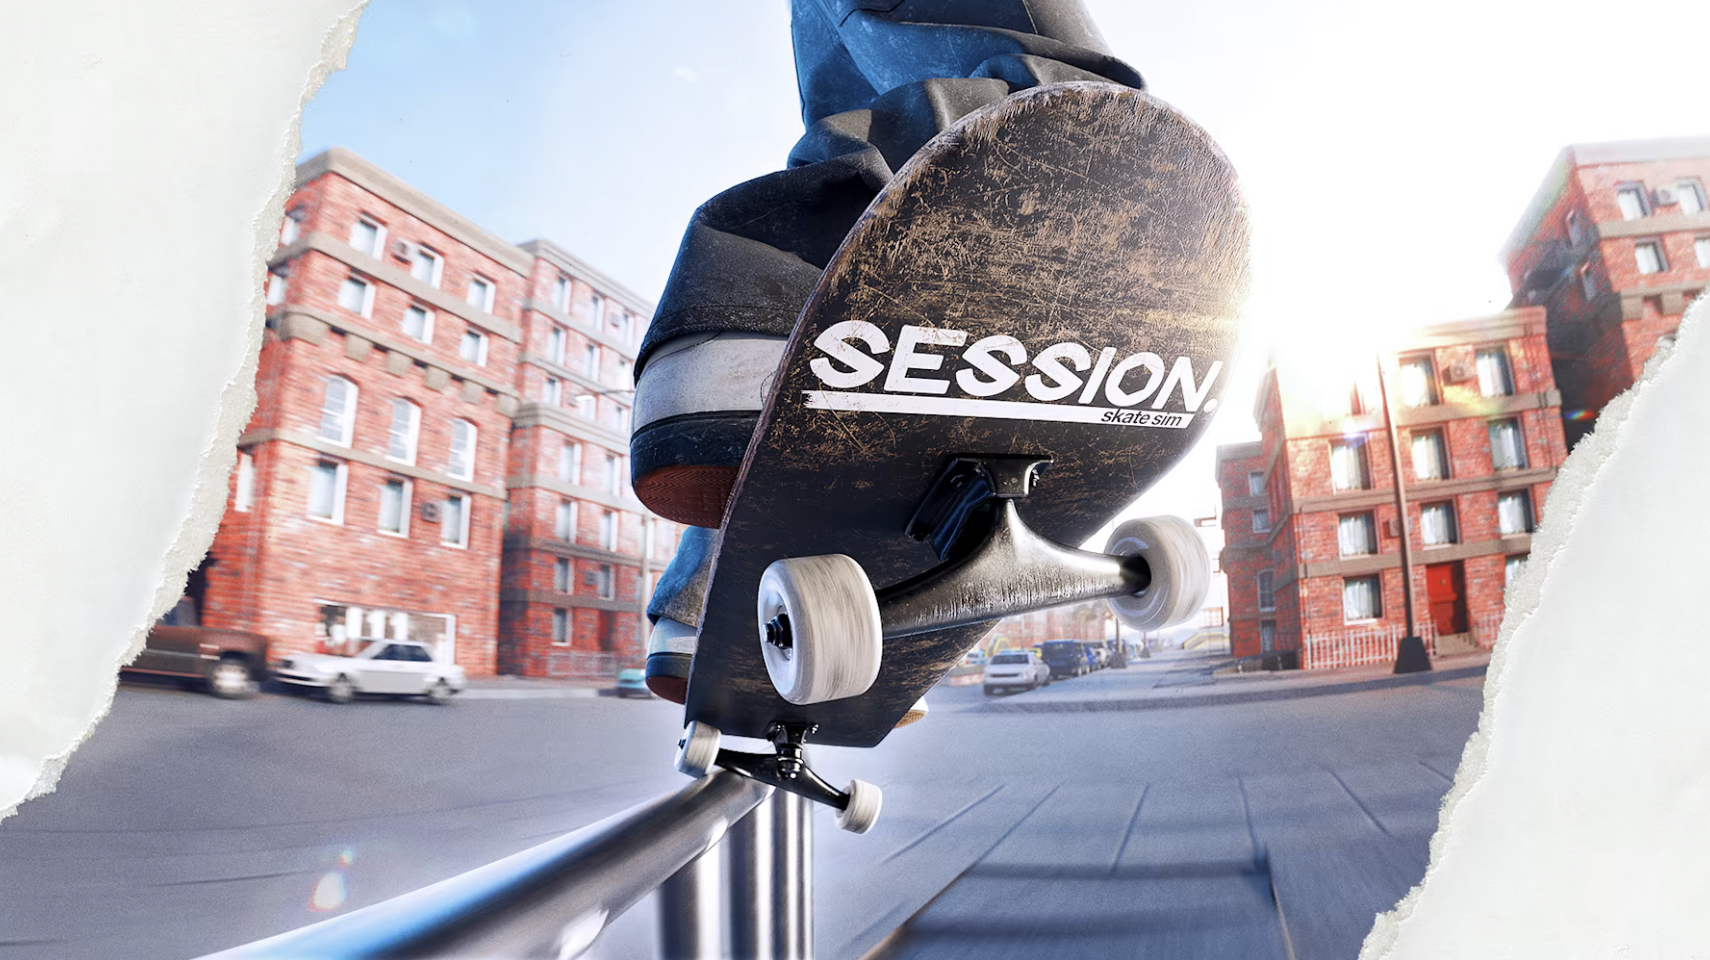 session skate sim switch review